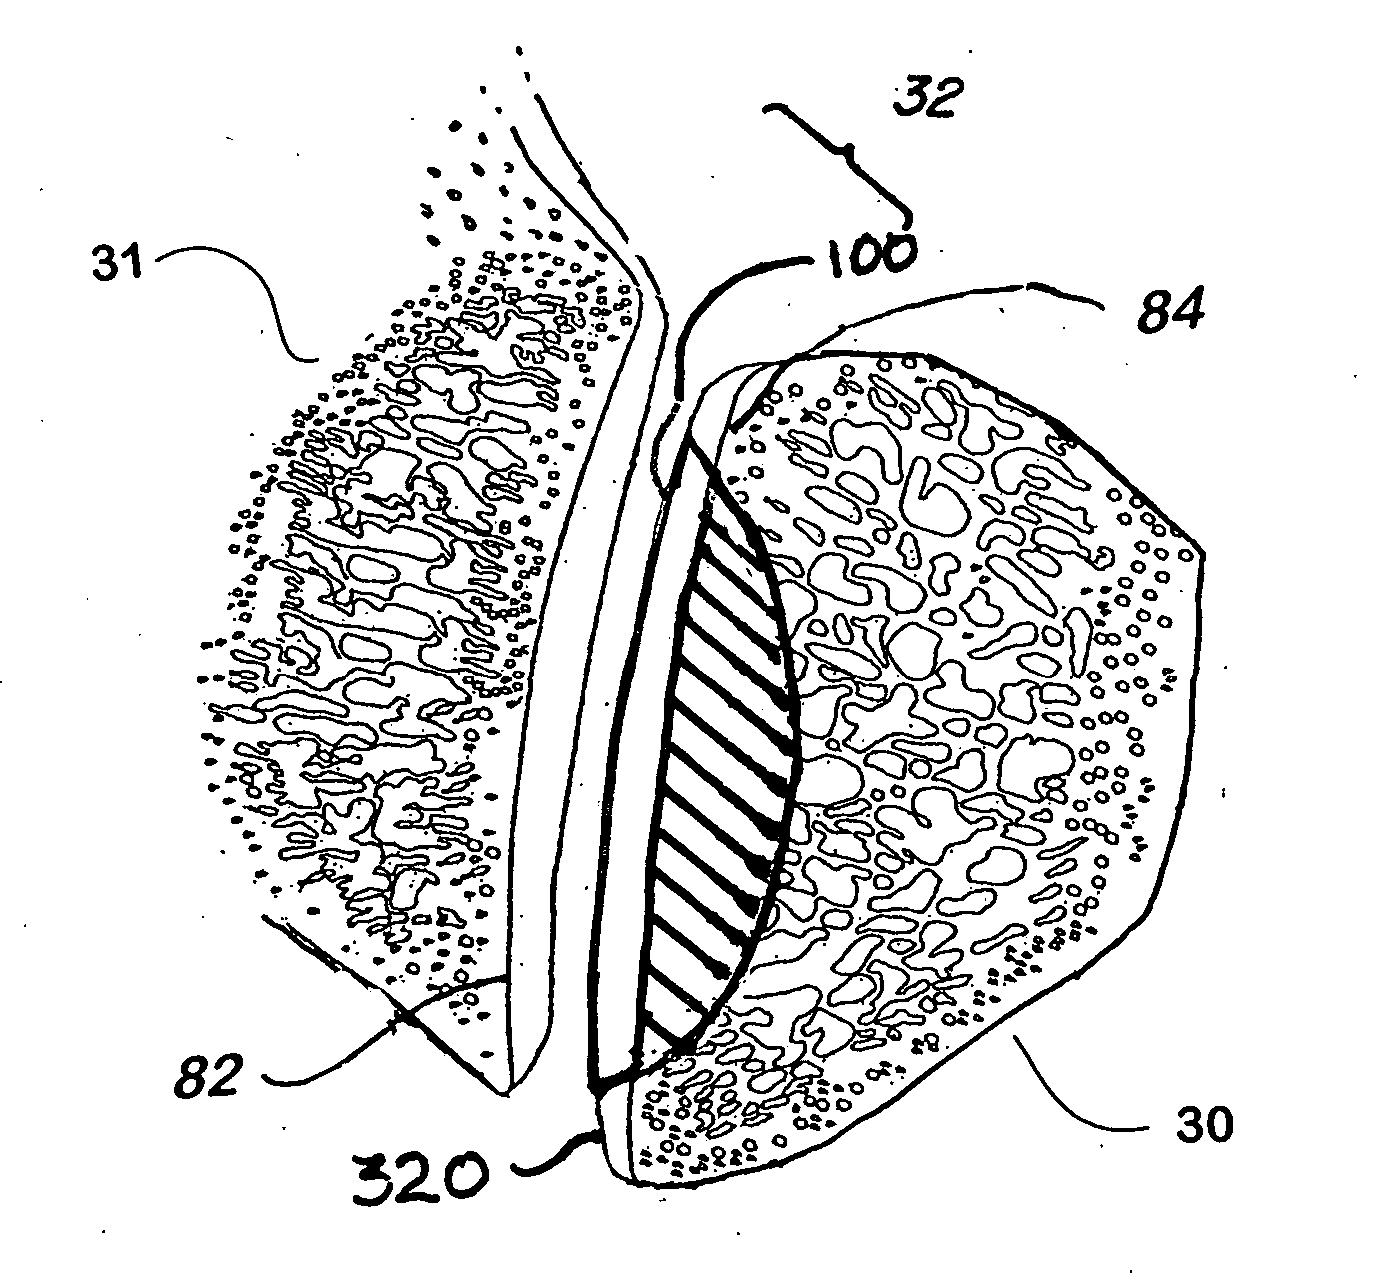 Devices and methods for treating facet joints